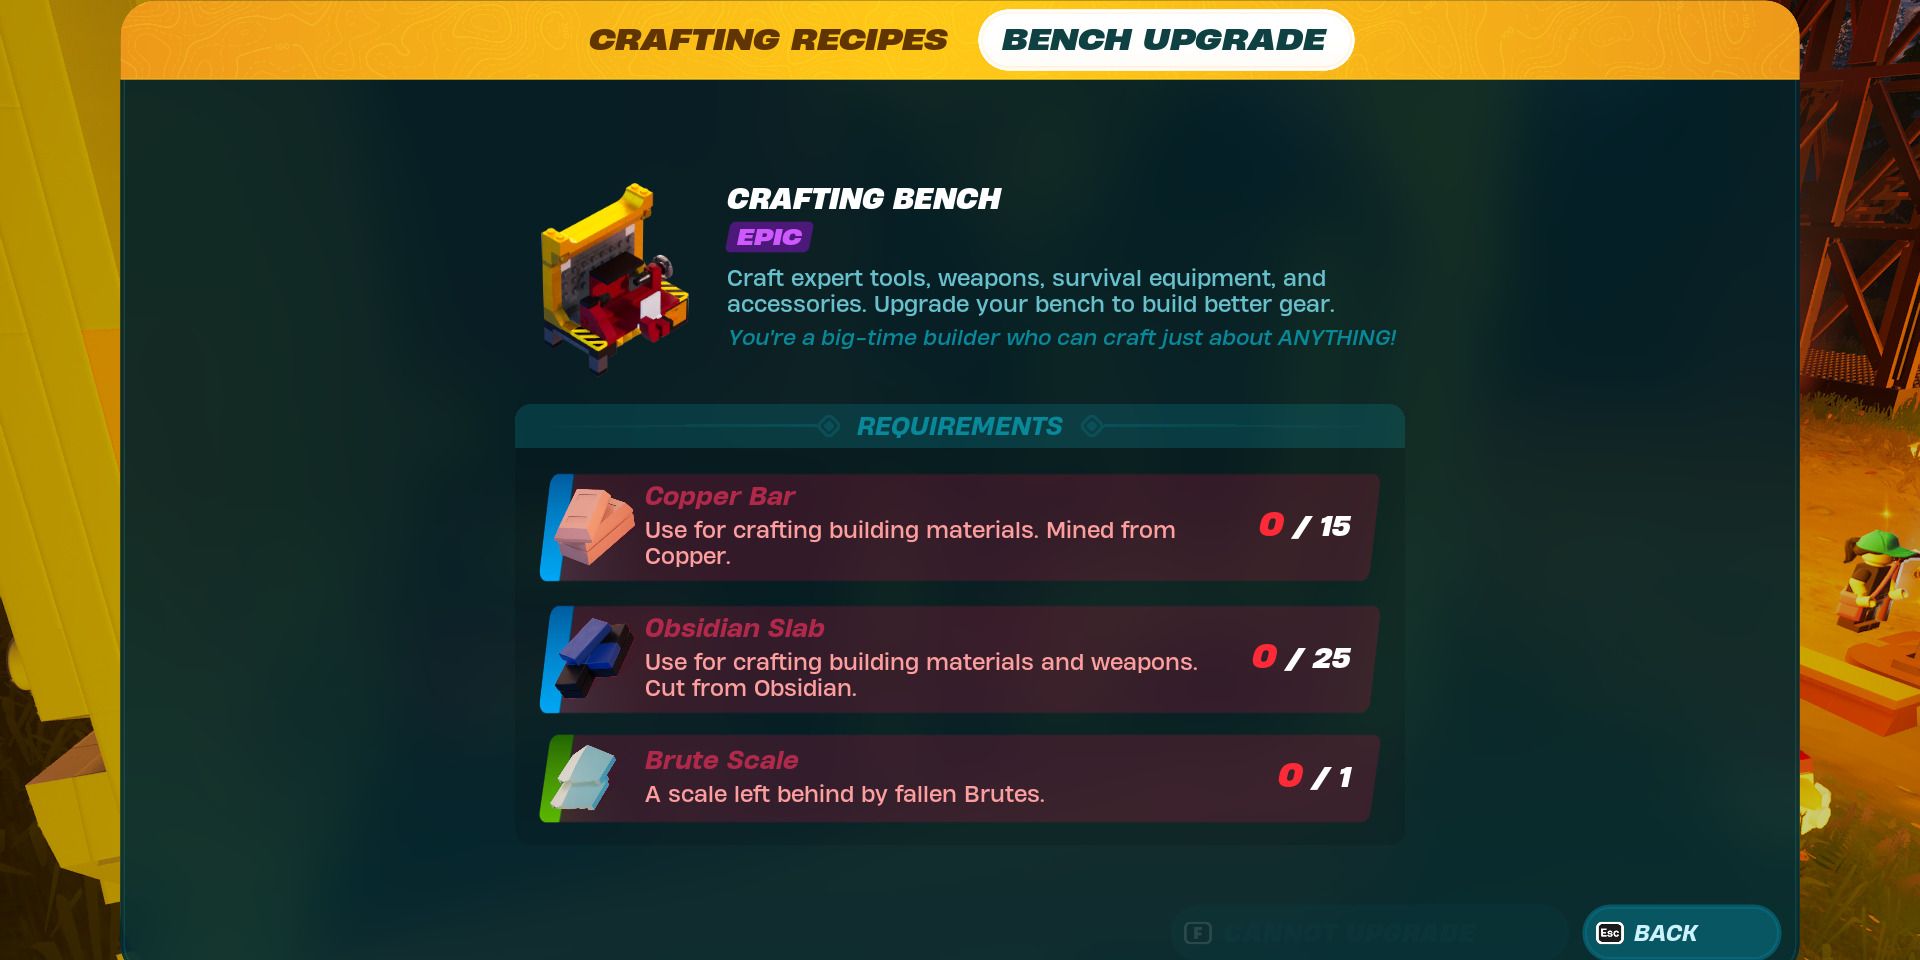 Image of the required materials for the Rare Crafting Bench in Lego Fortnite